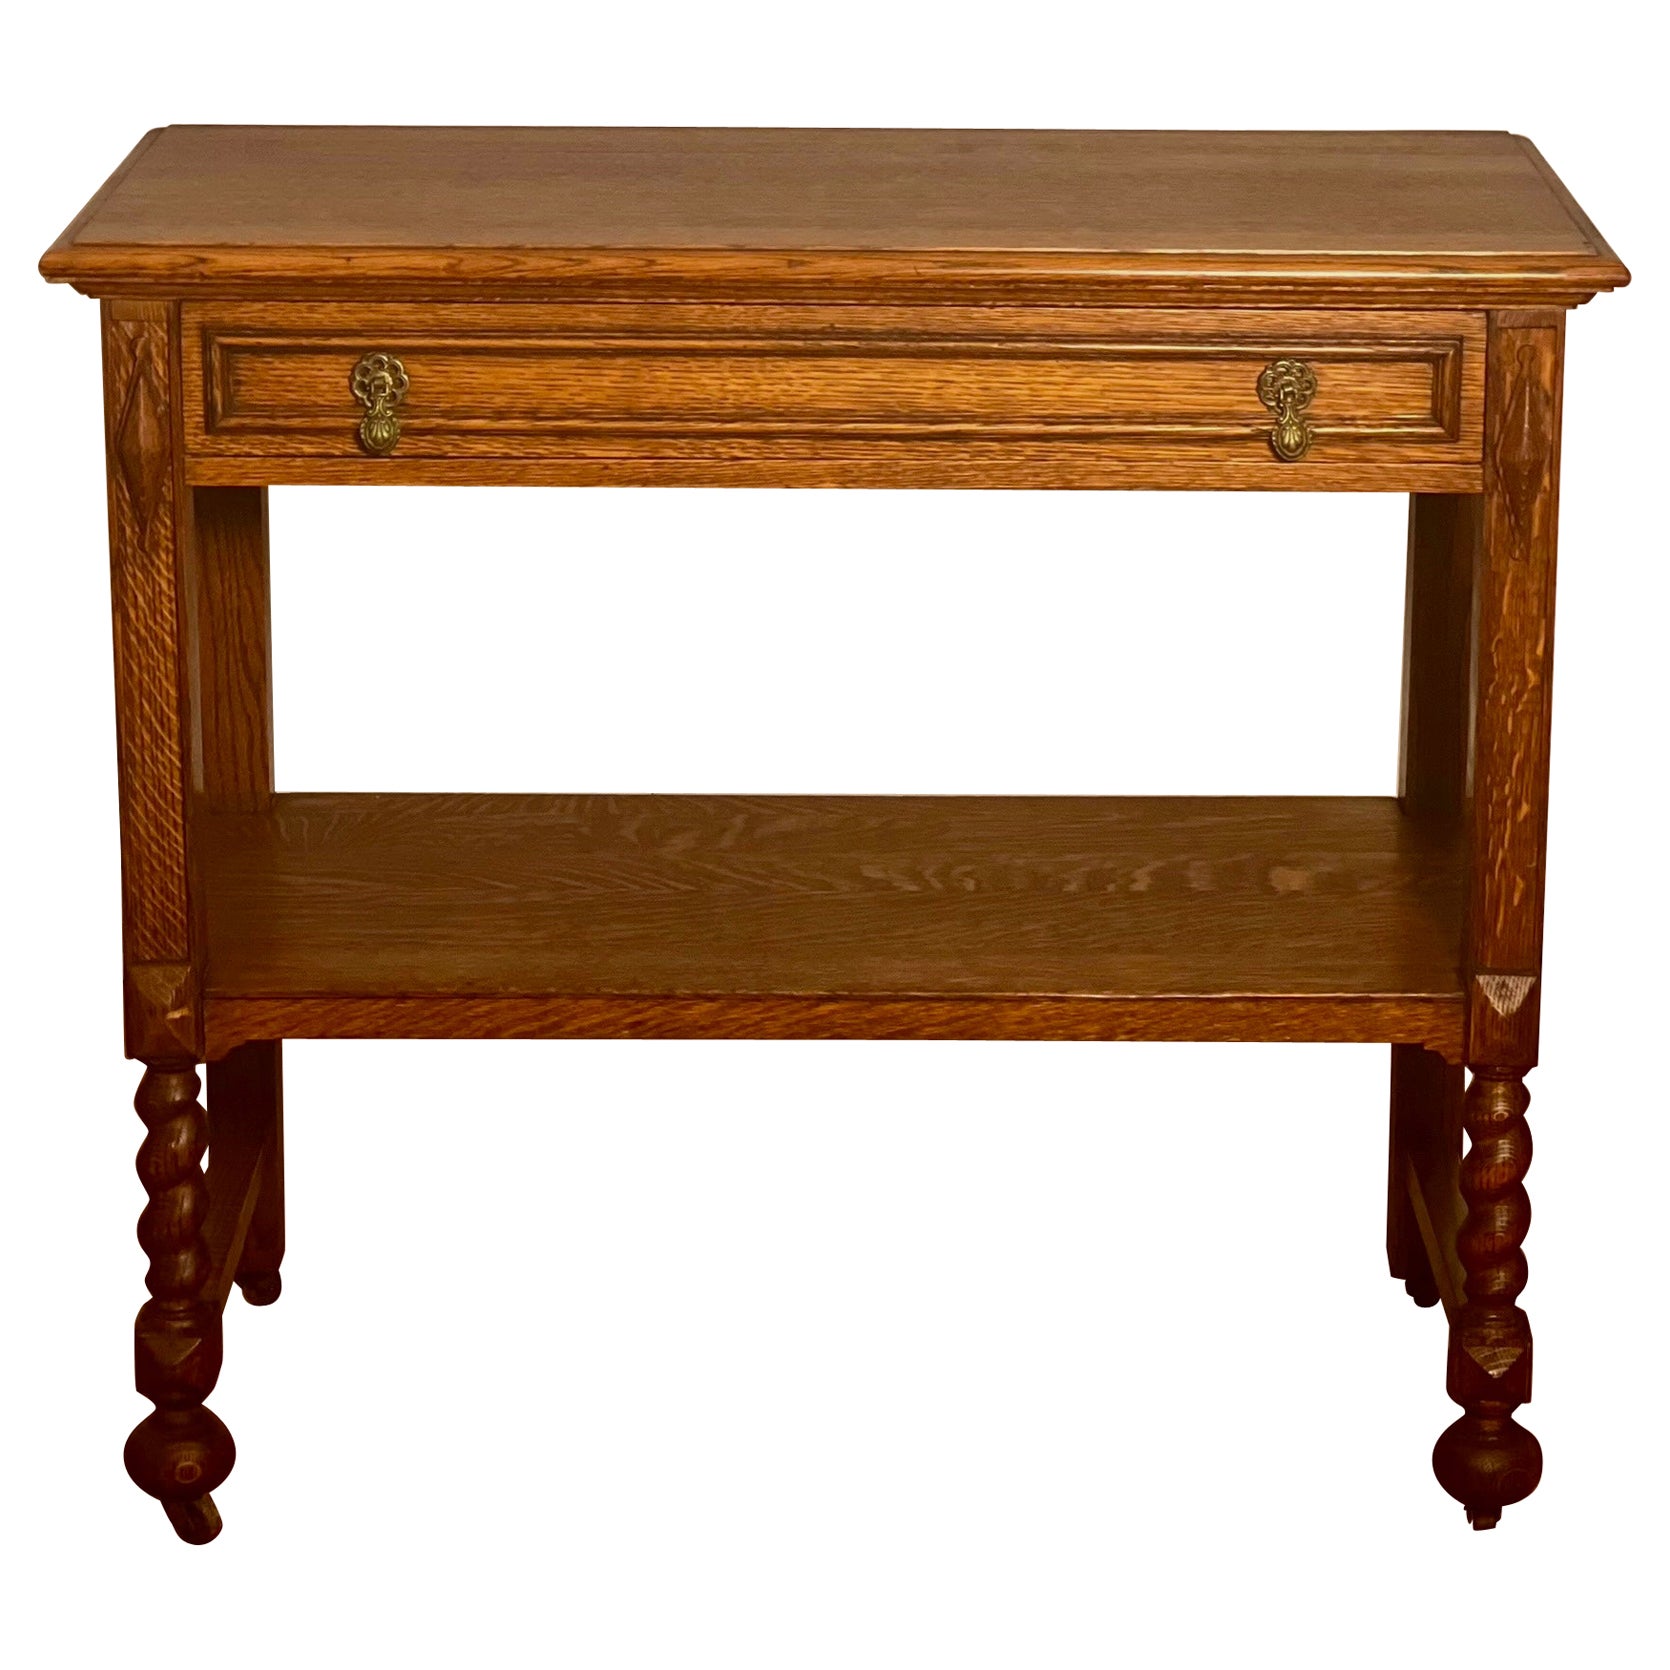 Early 20th Century English Quarter Sawn Oak Two-Tier Server on Casters